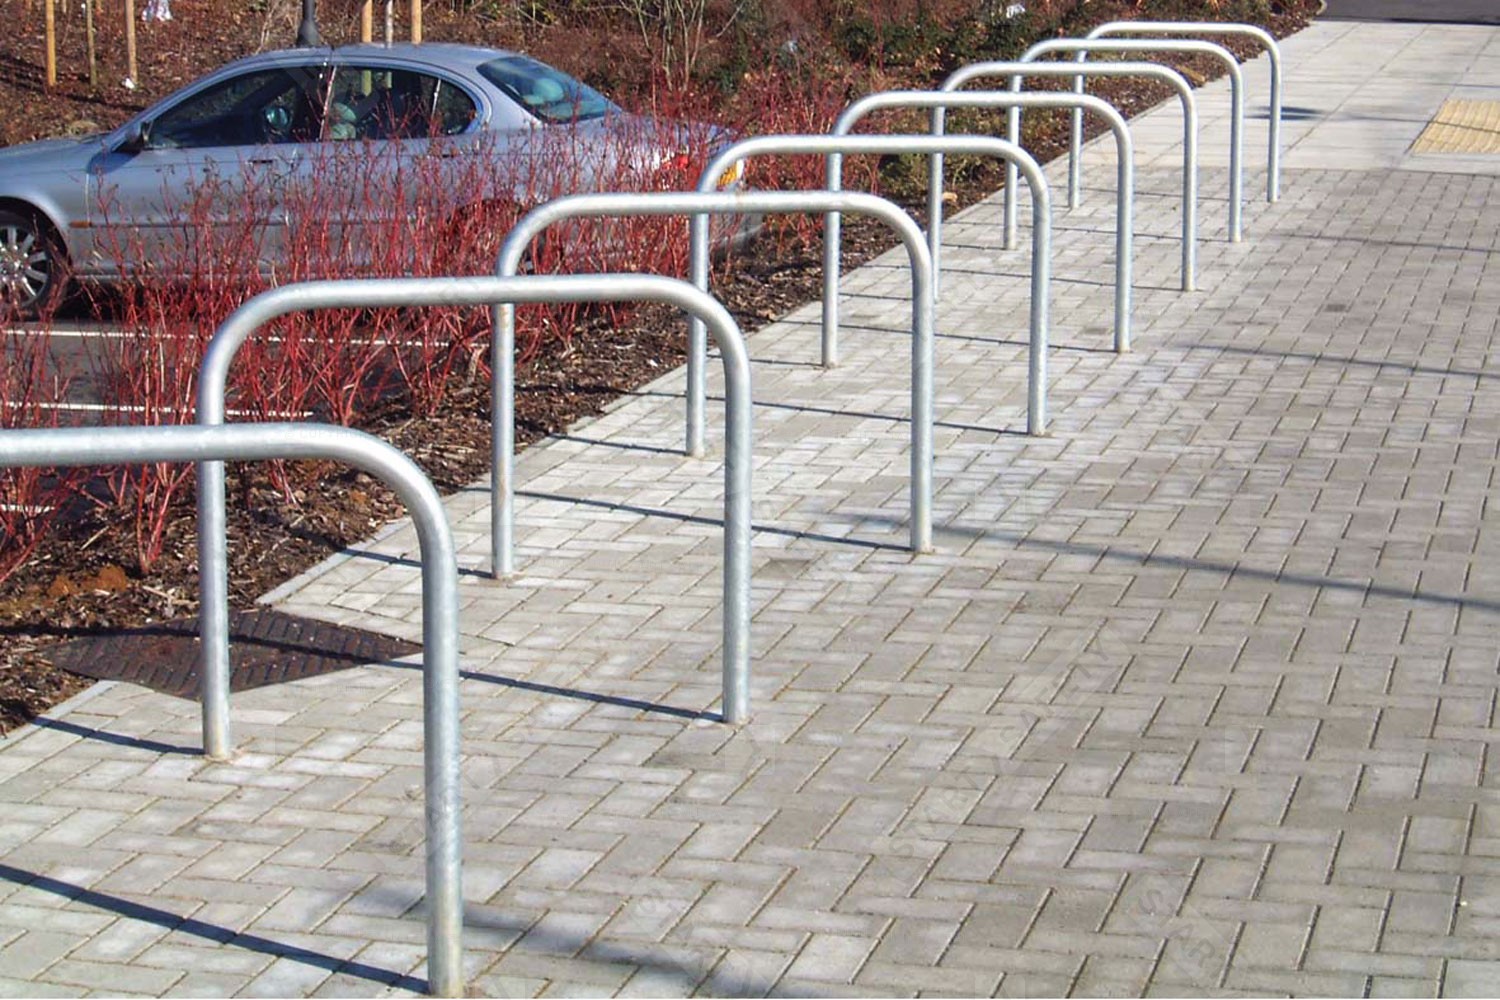 Sheffield cycle stand installed into block paving